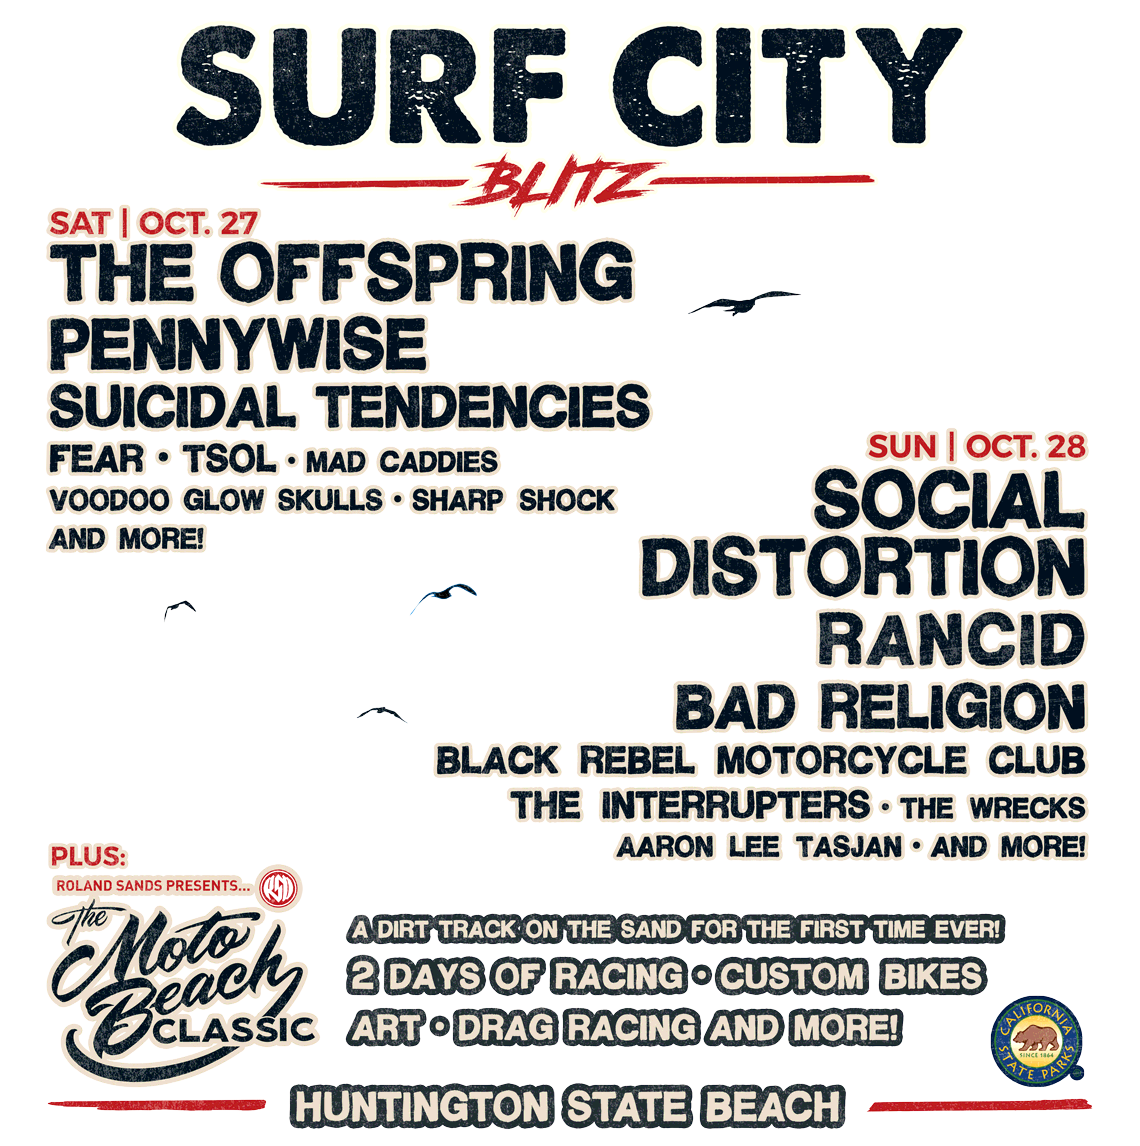 Surf City Blitz Reveals Band Performance & Moto Beach Classic Motorcycle Event Times, Onsite Activities & More